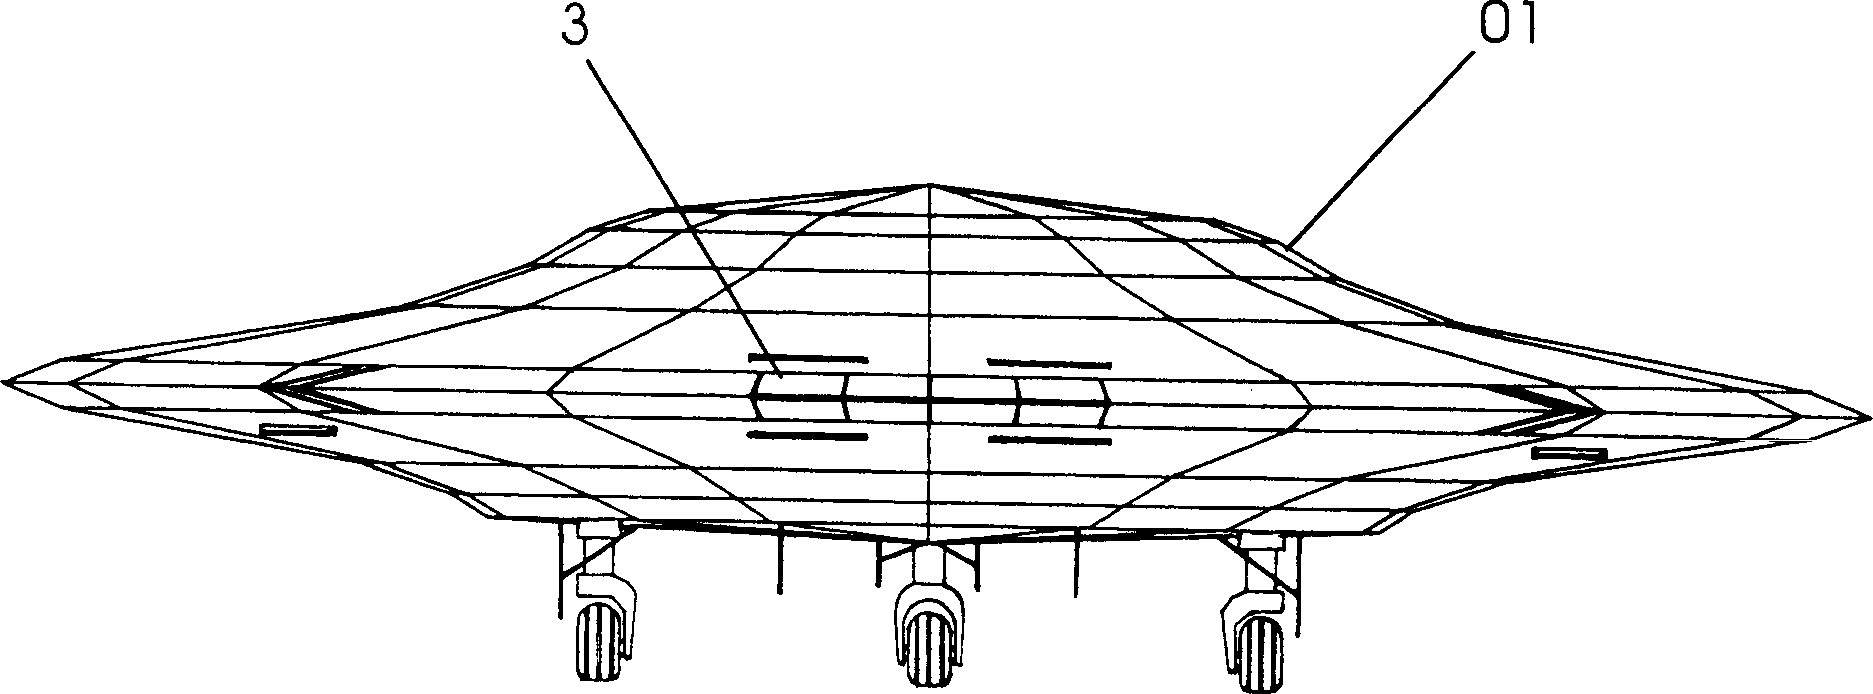 Contour structure of aircraft